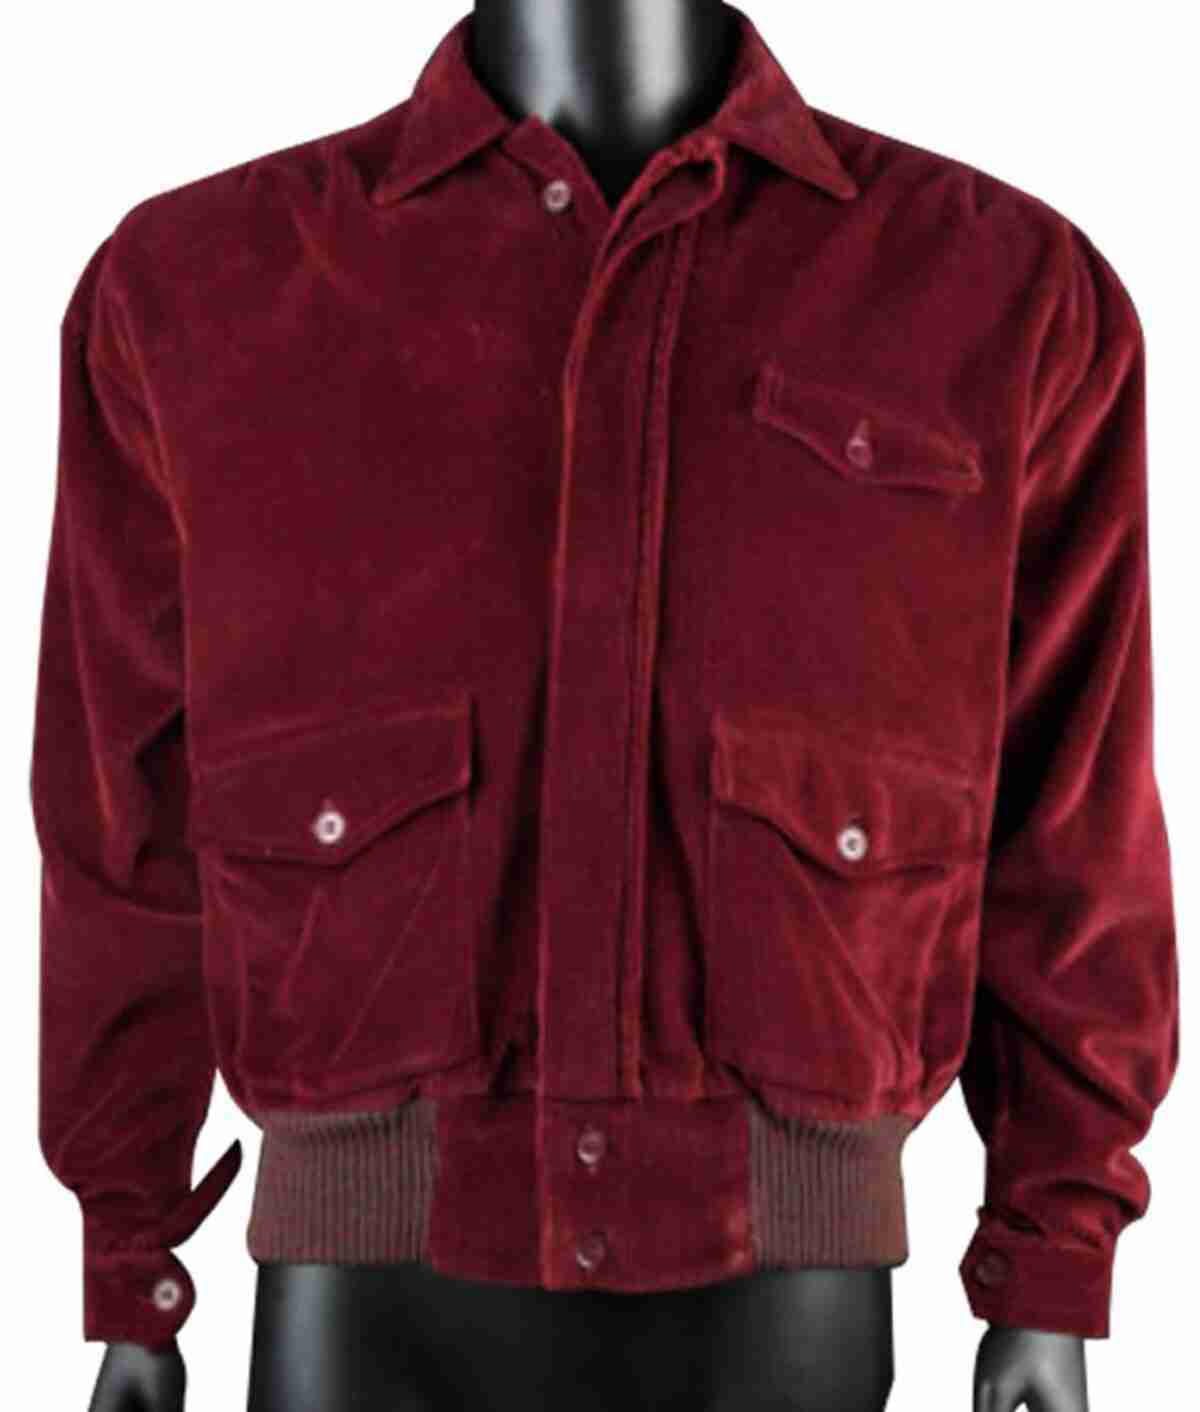 Front of the red corduroy jacket from The Shining movie